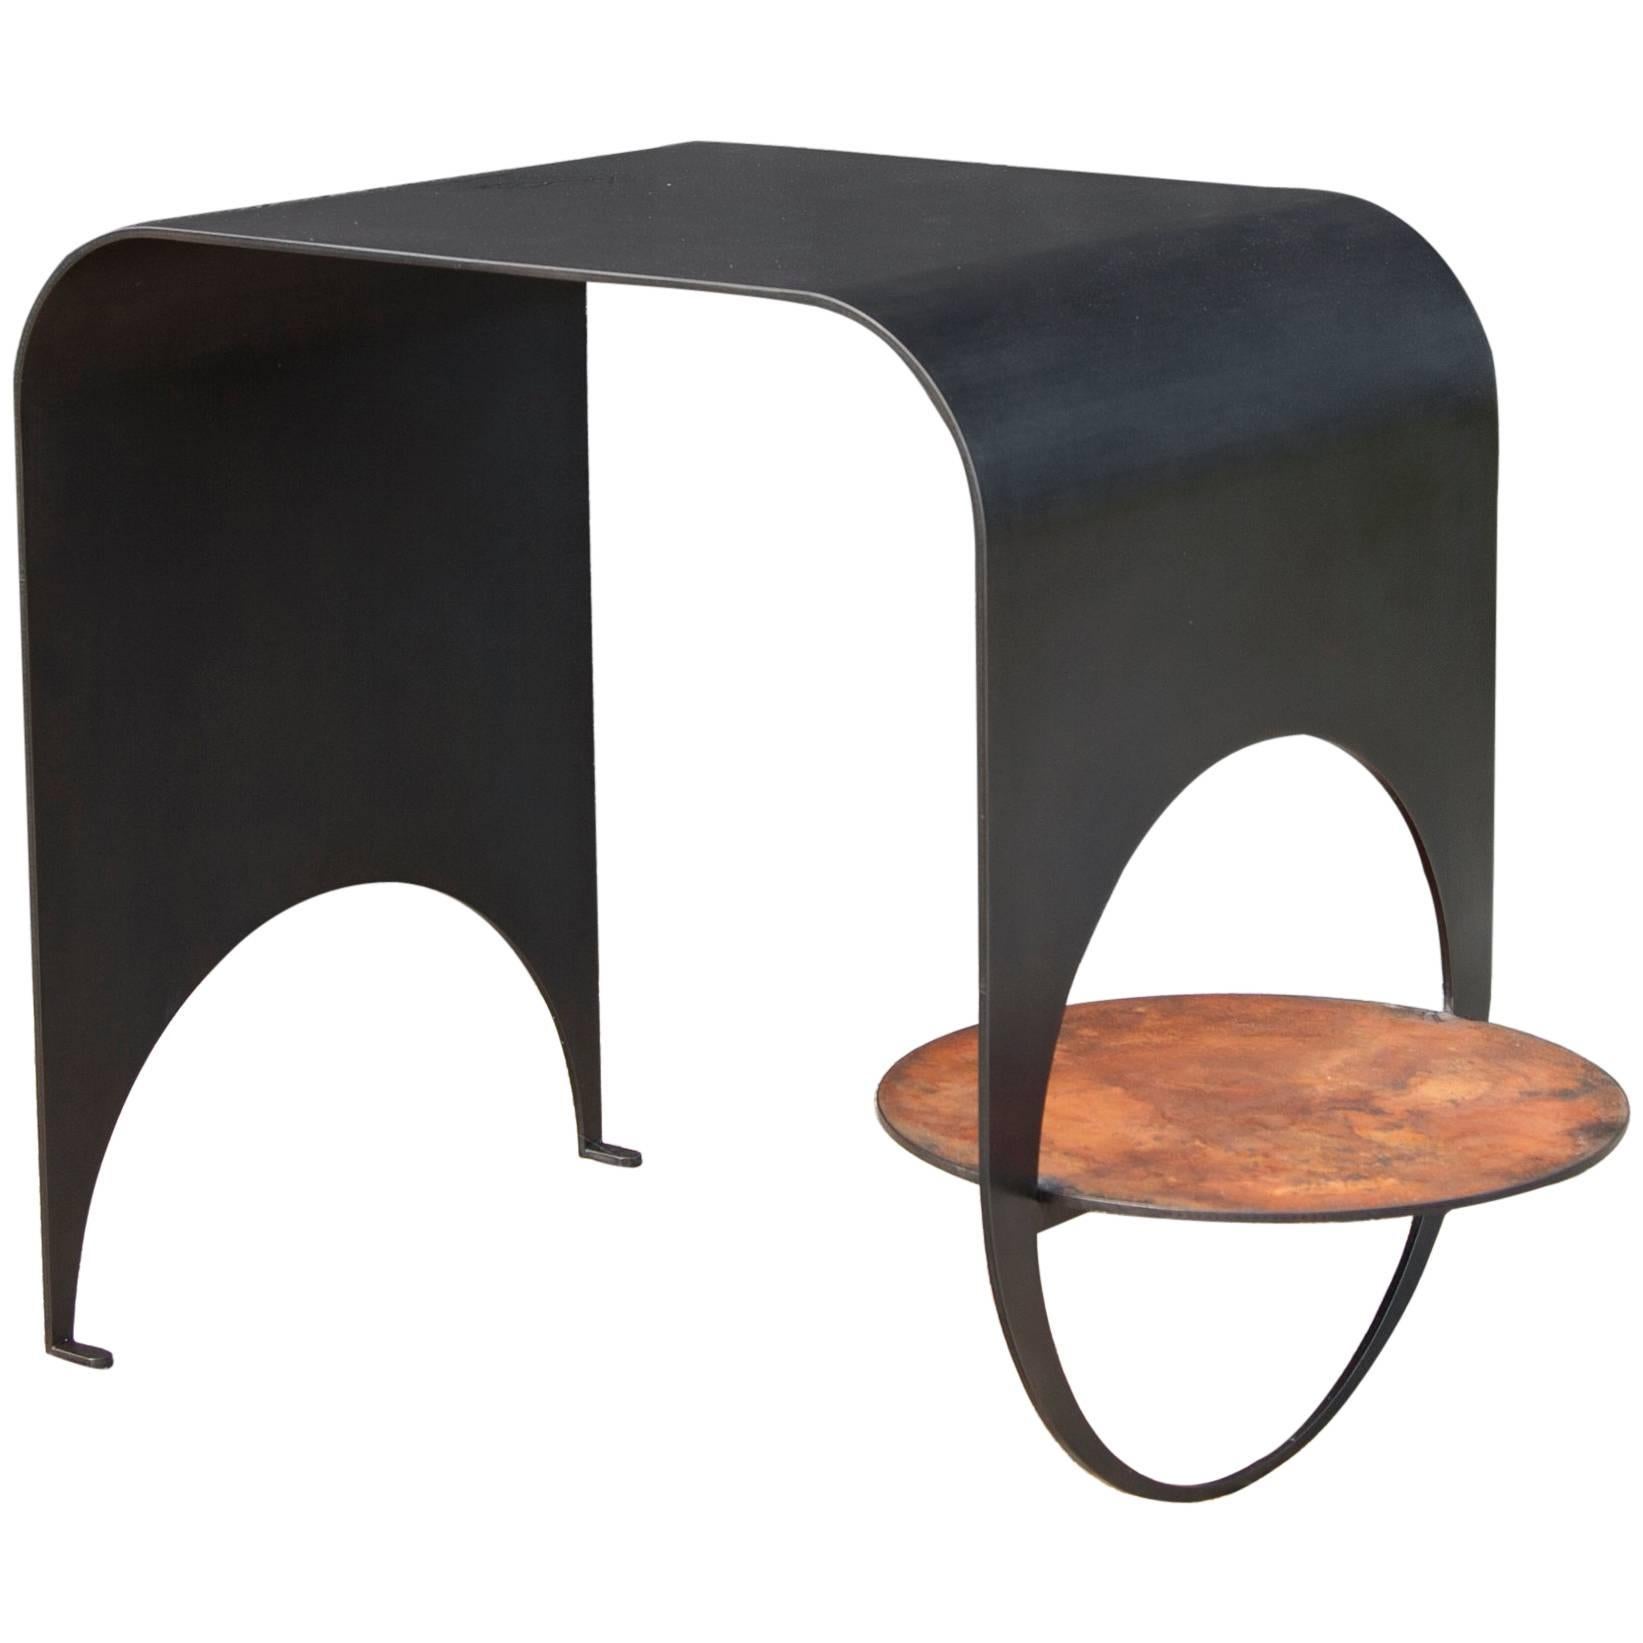 Thin Table 1 in Contemporary Blackened Steel and Oxidized Steel For Sale